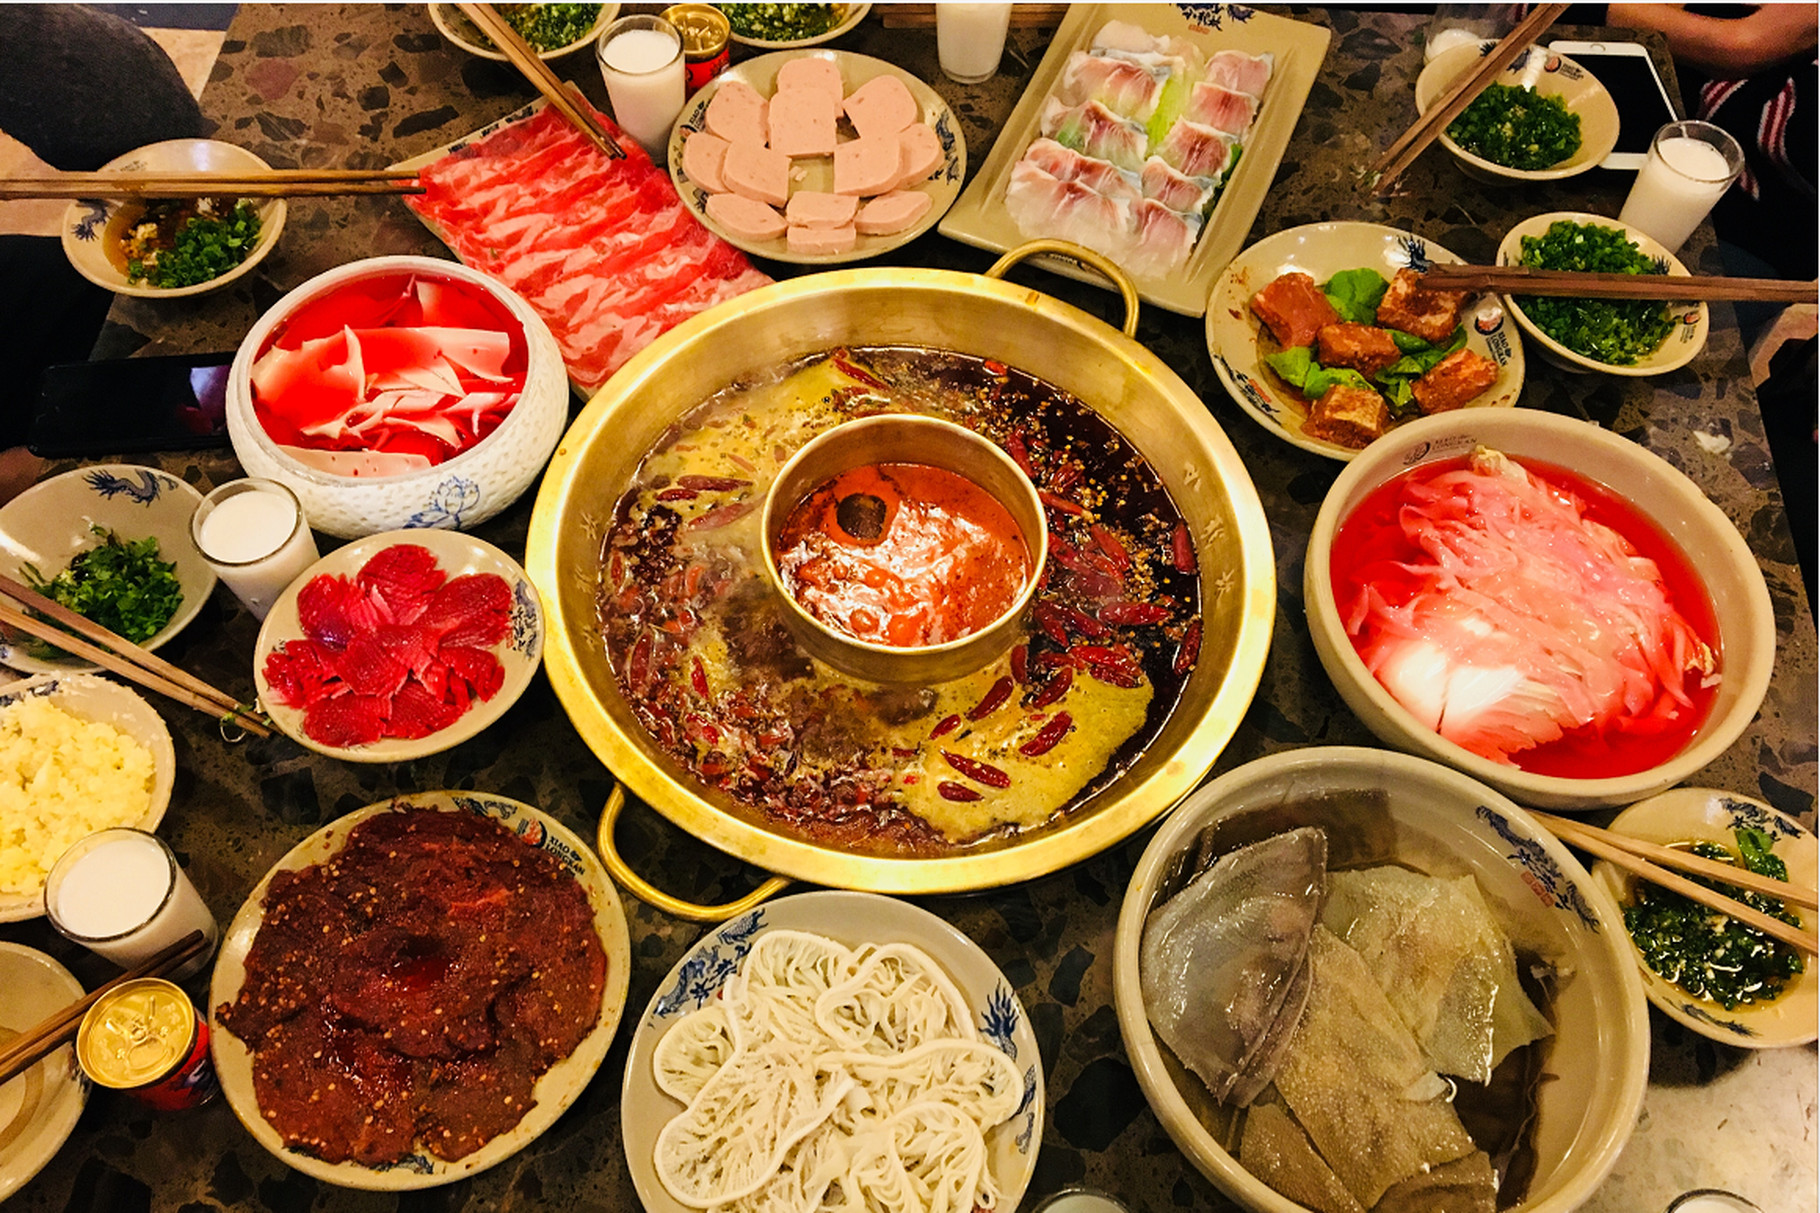 A spread of Chinese food dishes on a table.